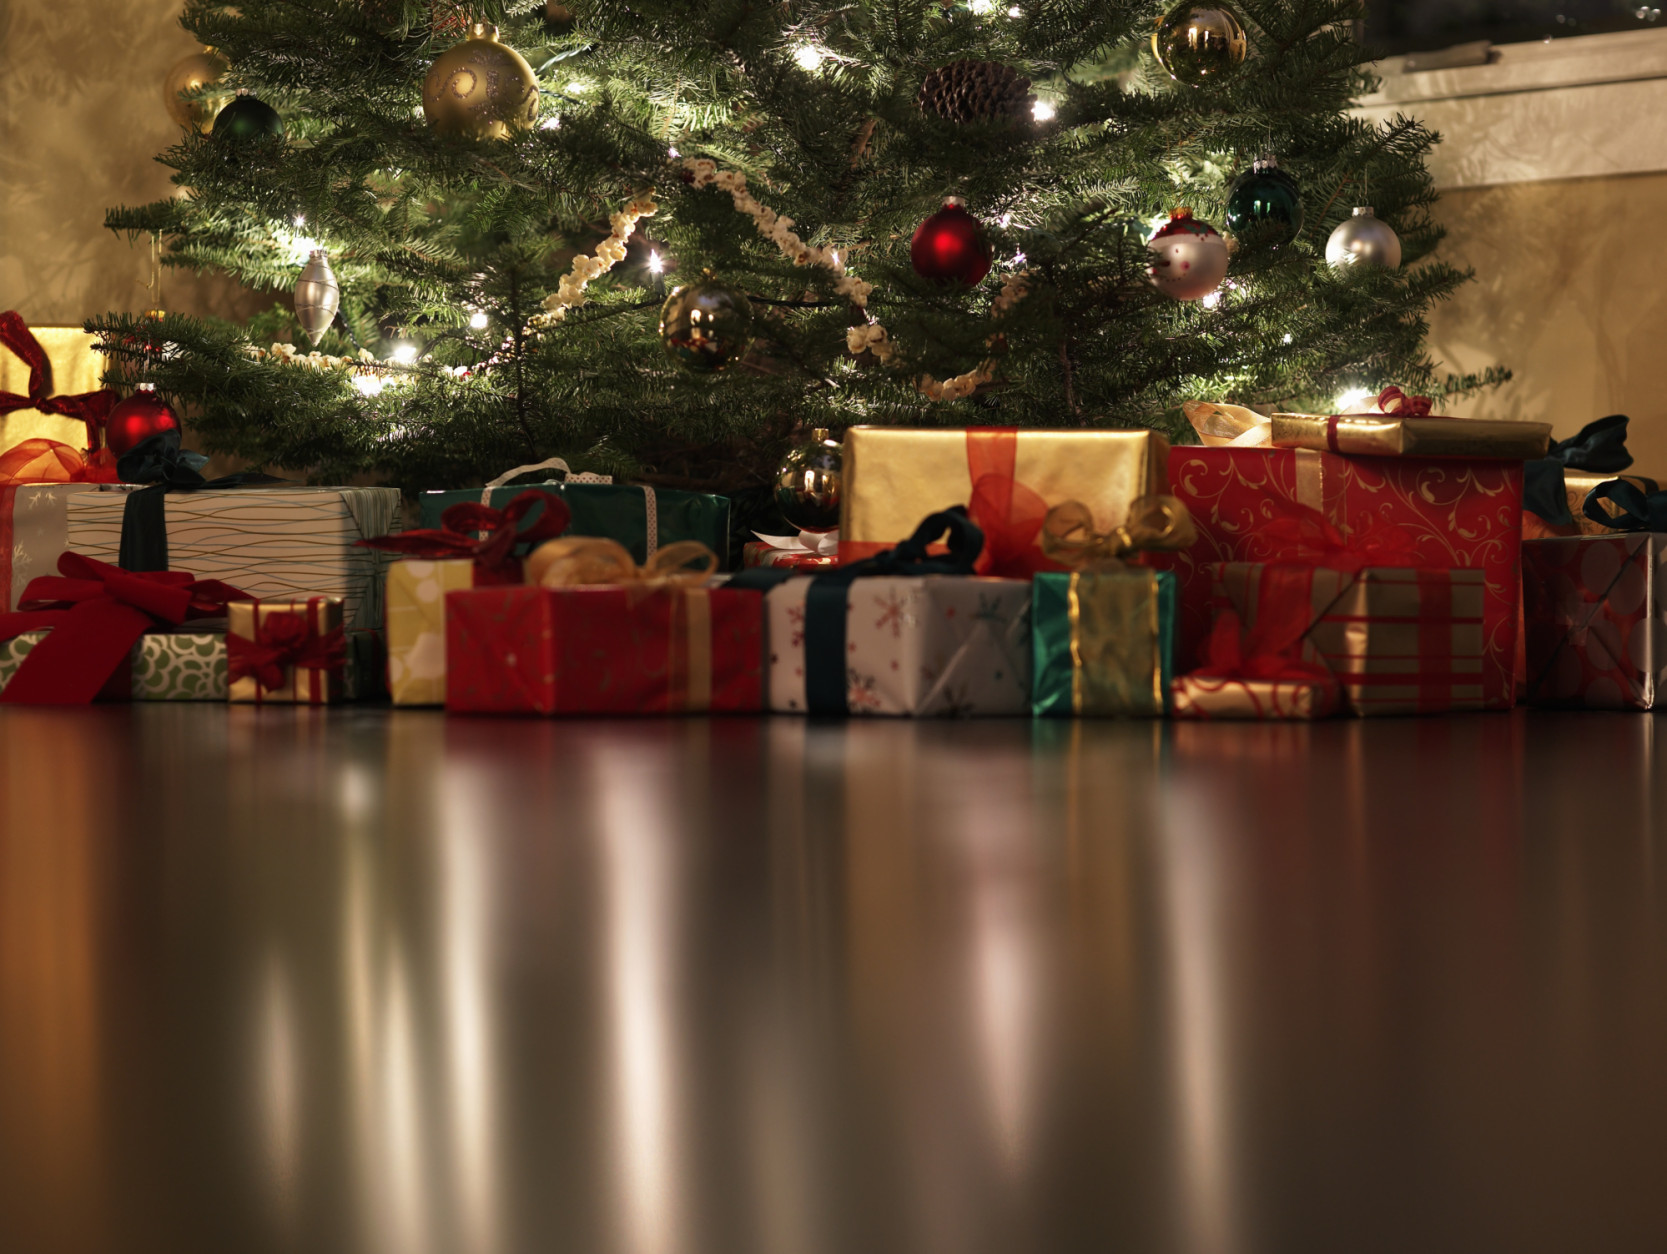 Presents under Christmas tree, surface level